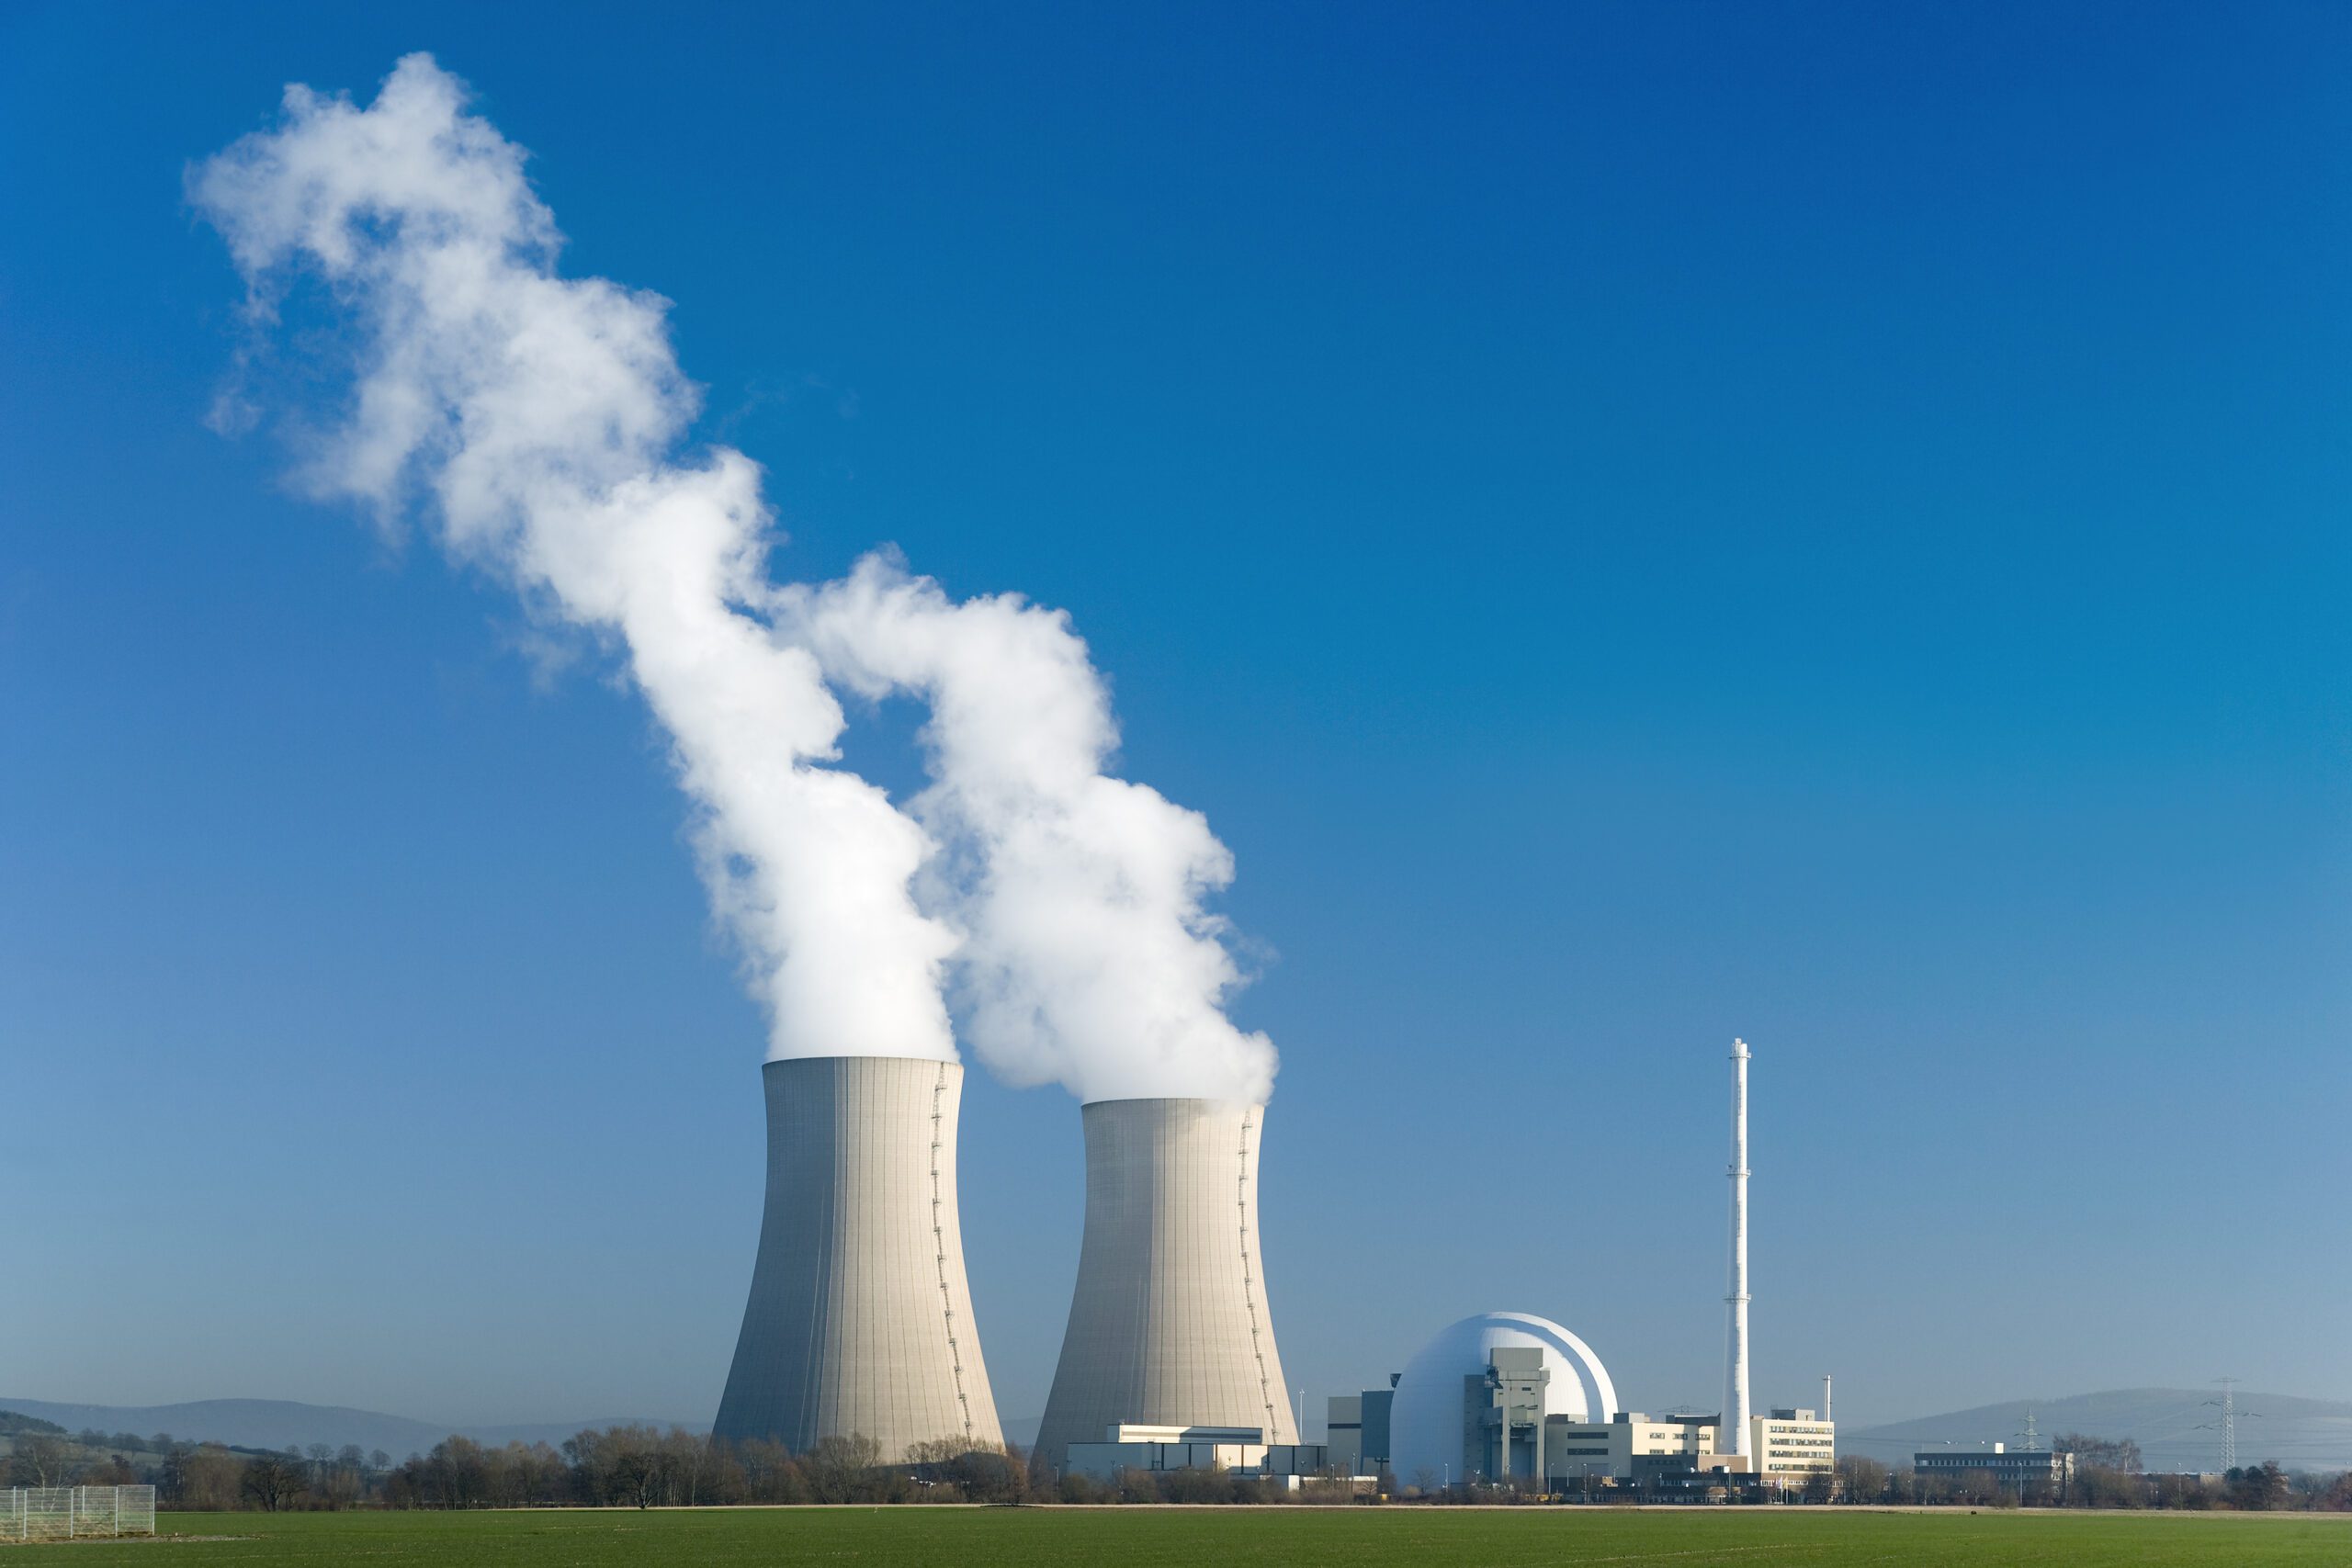 A power plant with two cooling towers releasing vapour clouds.